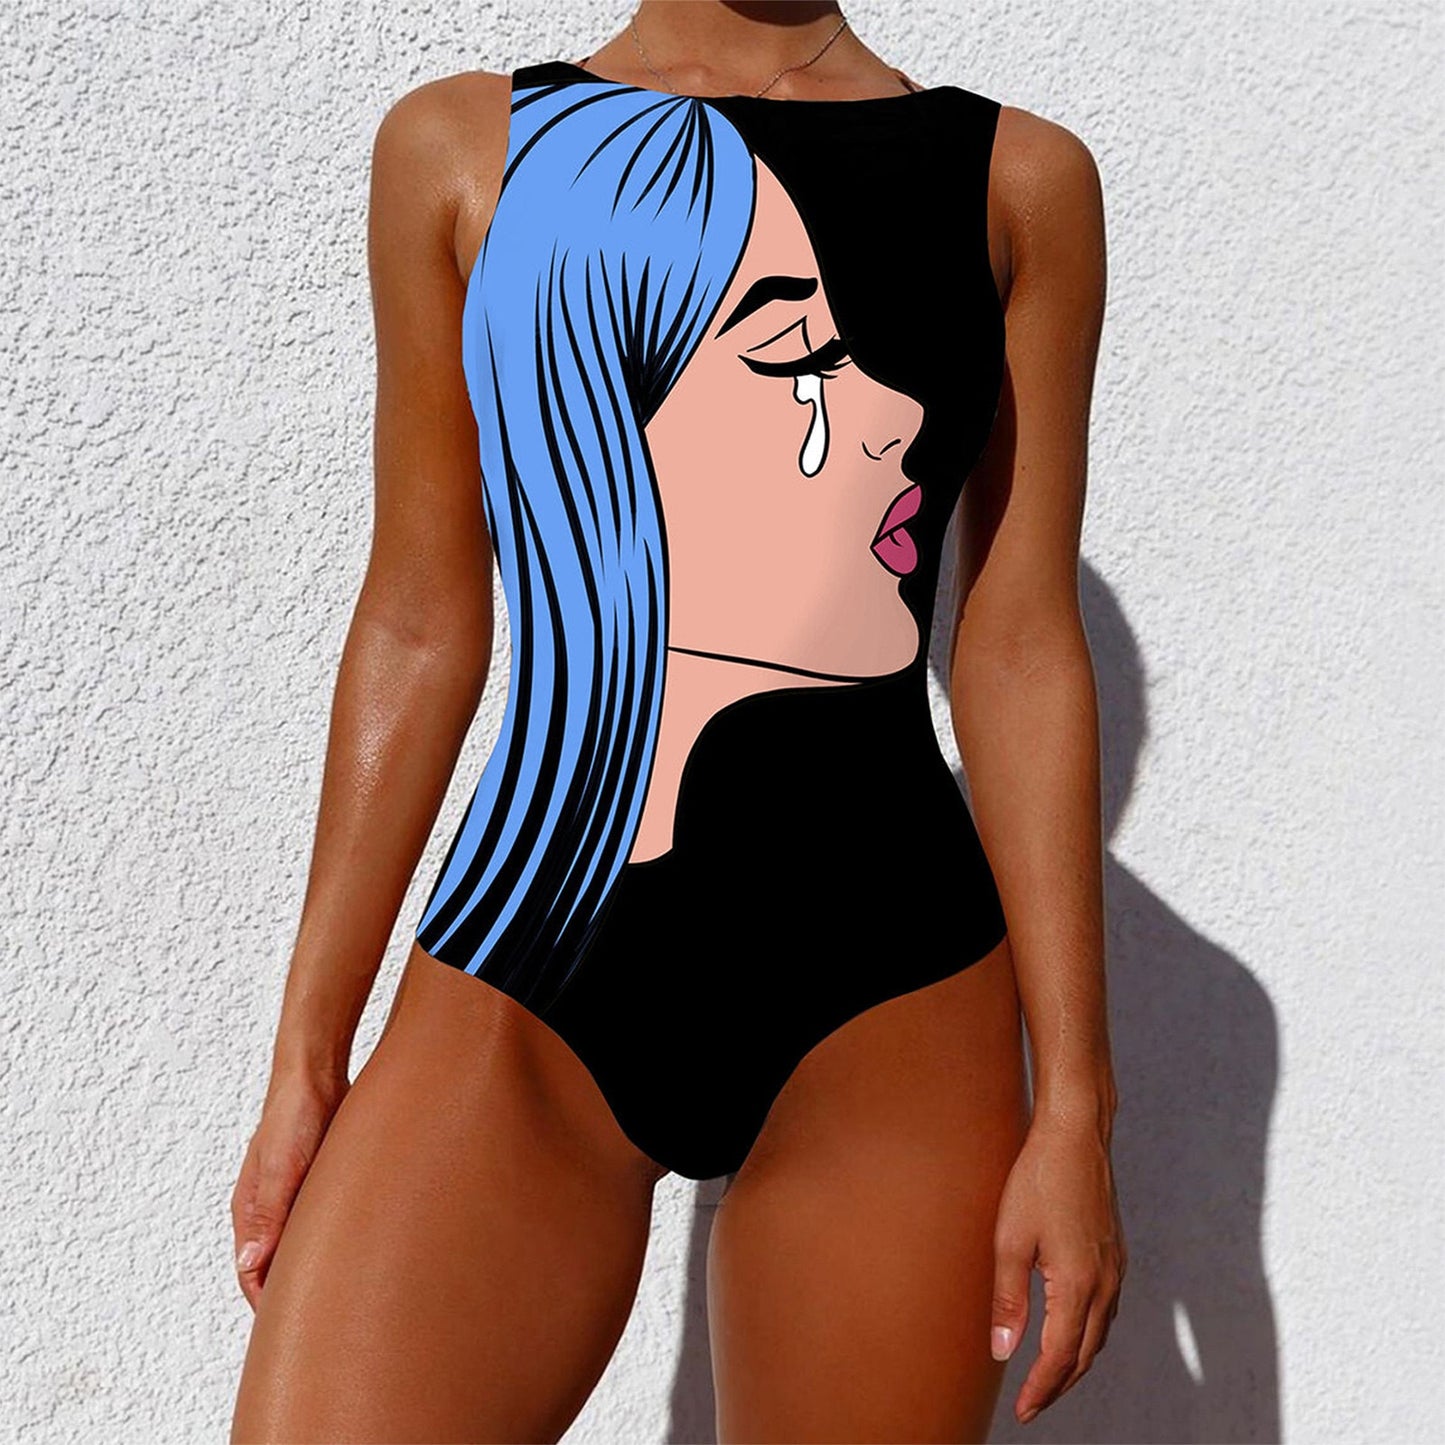 Backless One-Piece Graffiti Abstract Print Bathing Suit